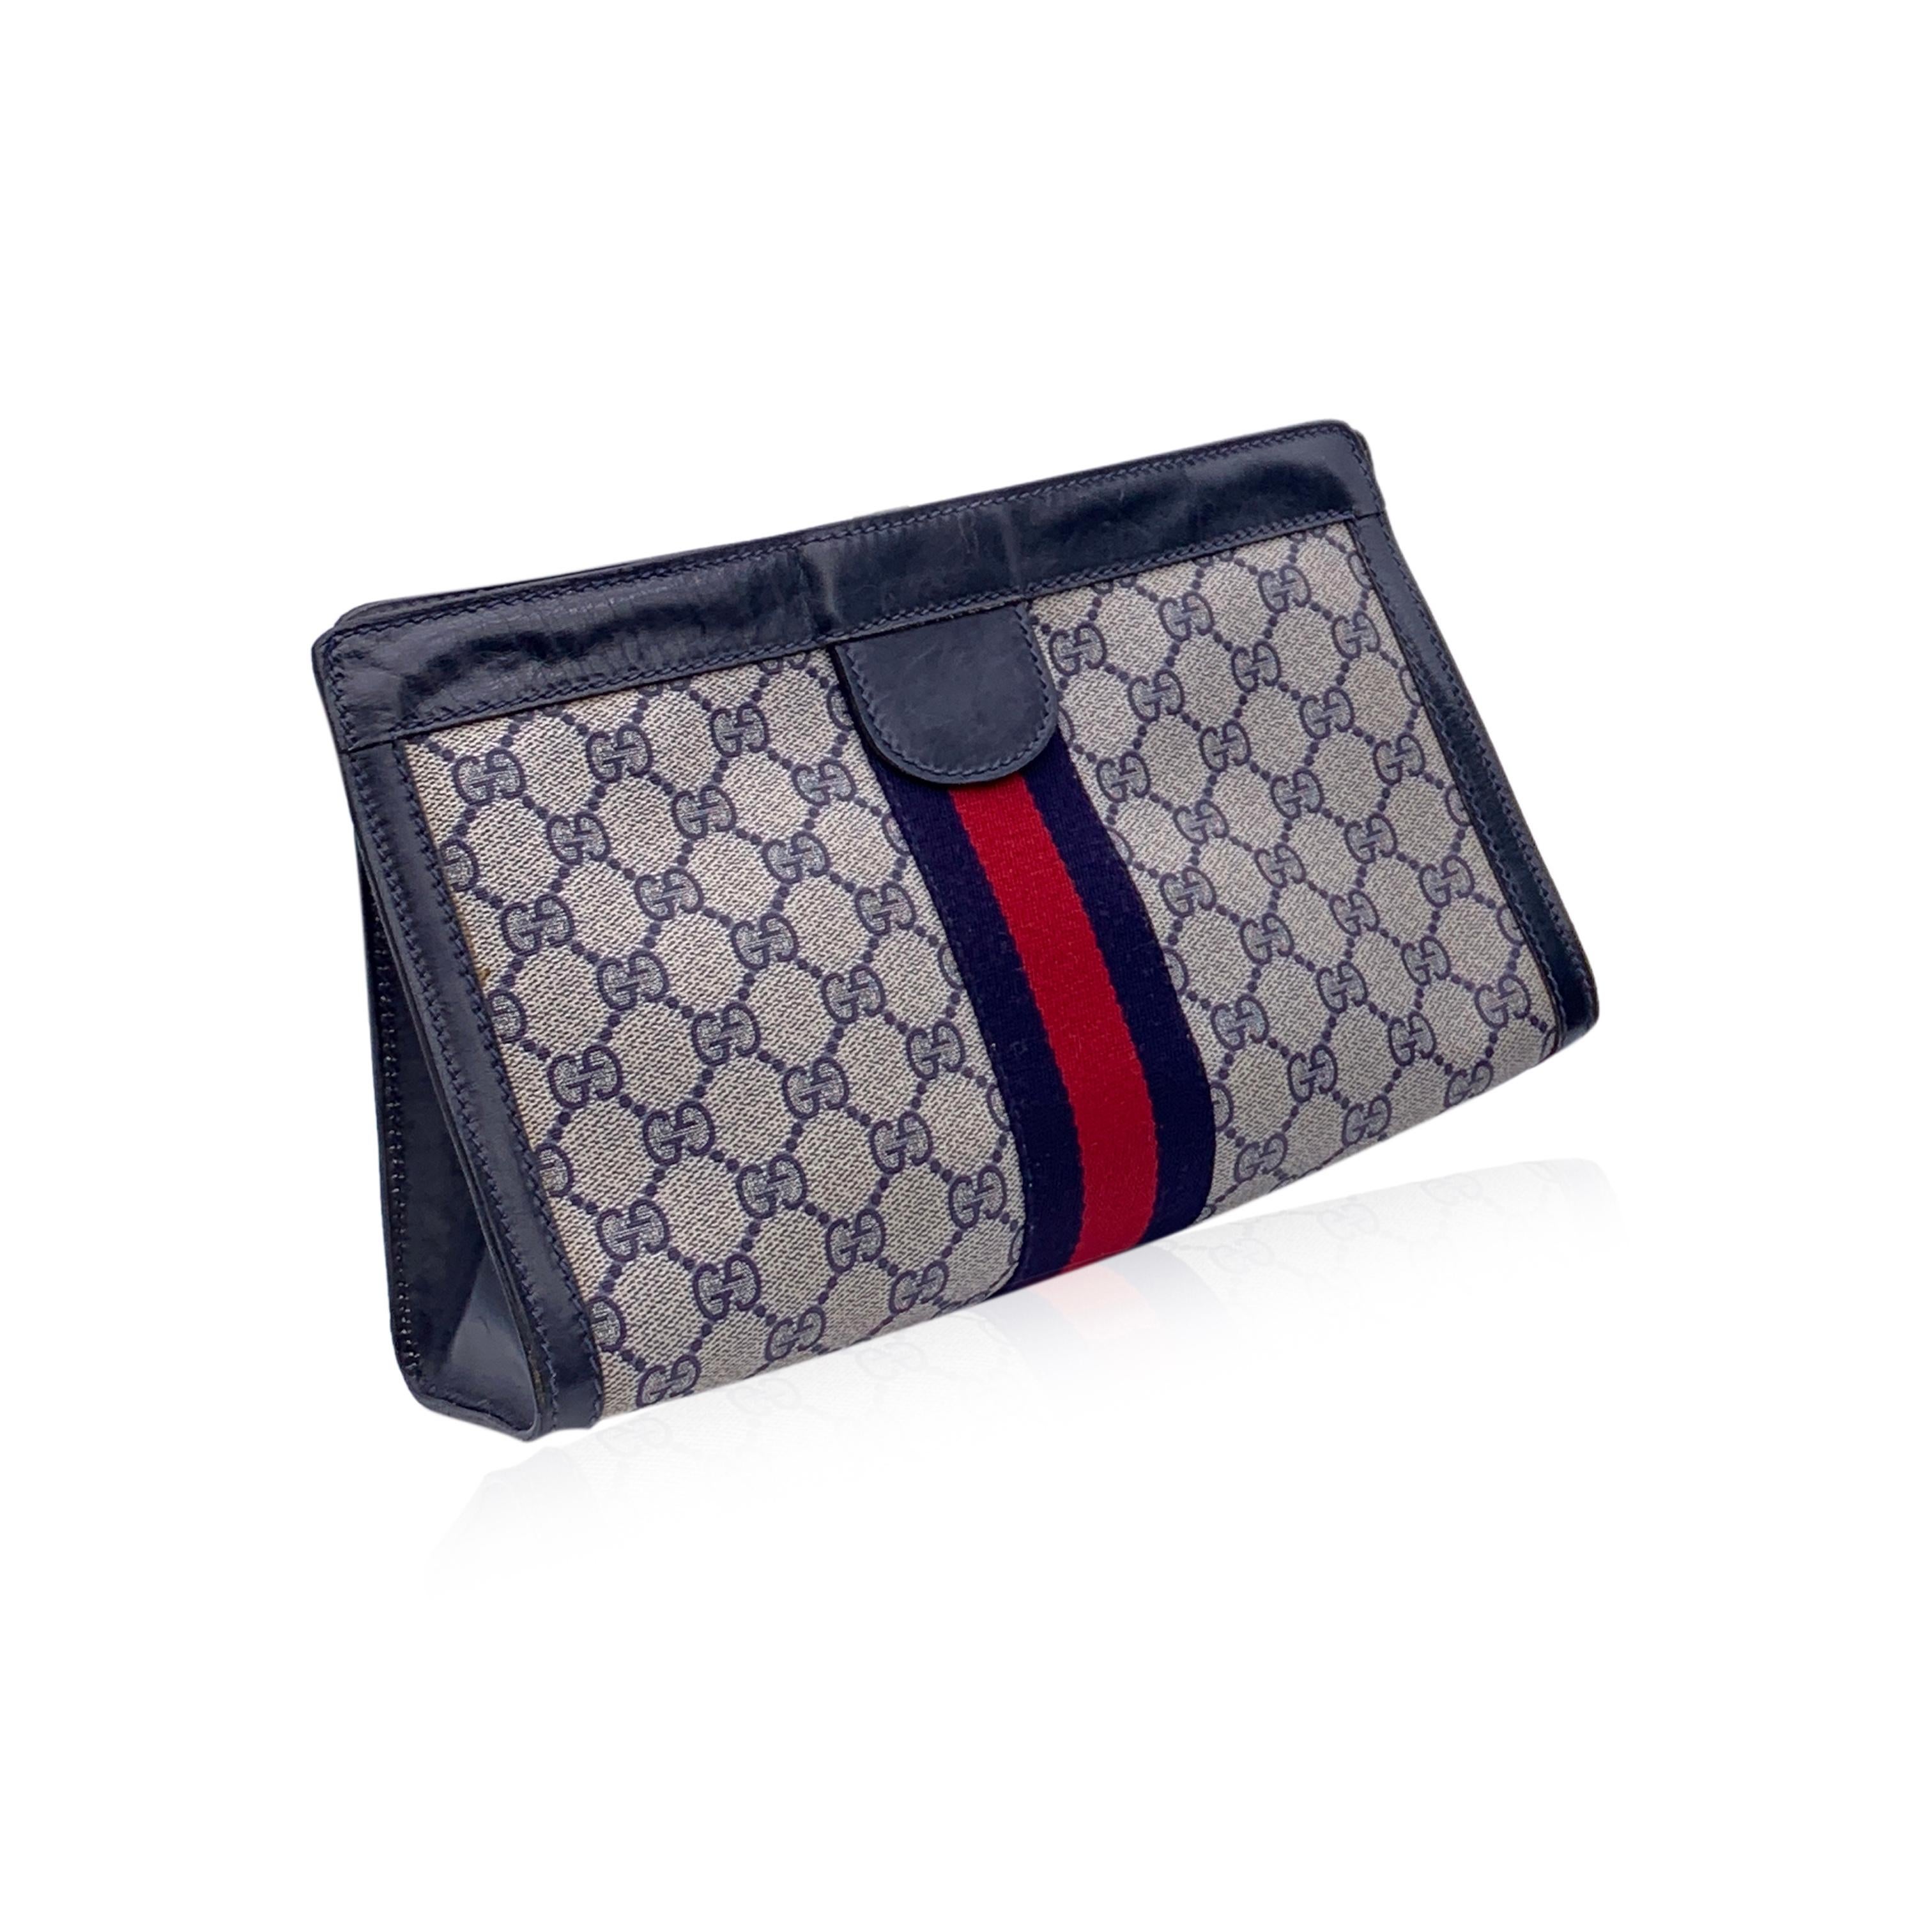 Gucci Vintage Blue Monogram Canvas Cosmetic Bag Clutch with Stripe. Blue Monogram Canvas with Genuine Leather trim. Blue/Red/blue stripes around the bag. Upper hook and loop closure. Waterproof lining. 